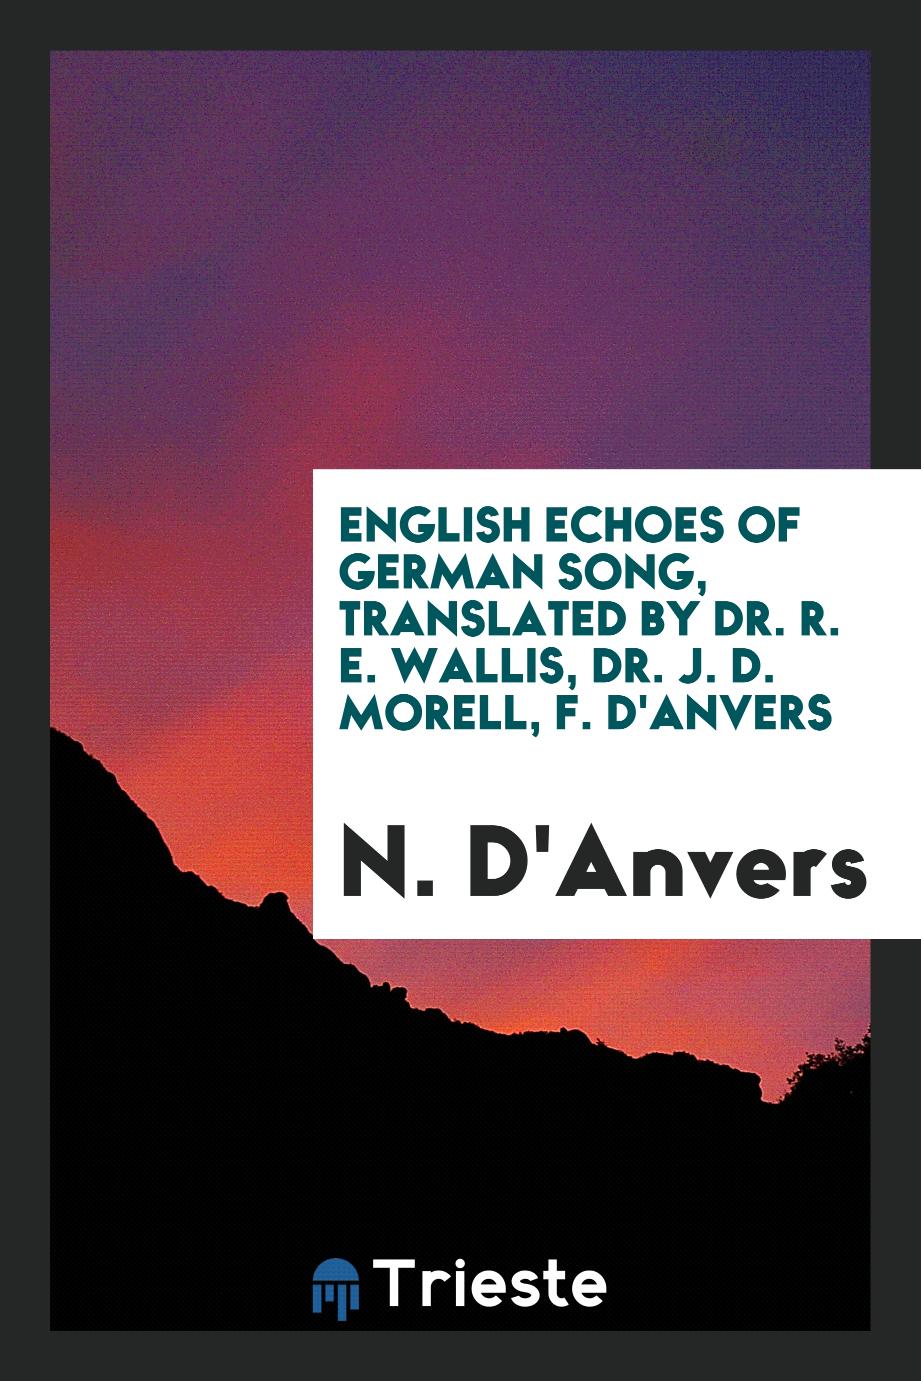 N. D'Anvers - English Echoes of German Song, Translated by Dr. R. E. Wallis, Dr. J. D. Morell, F. D'Anvers